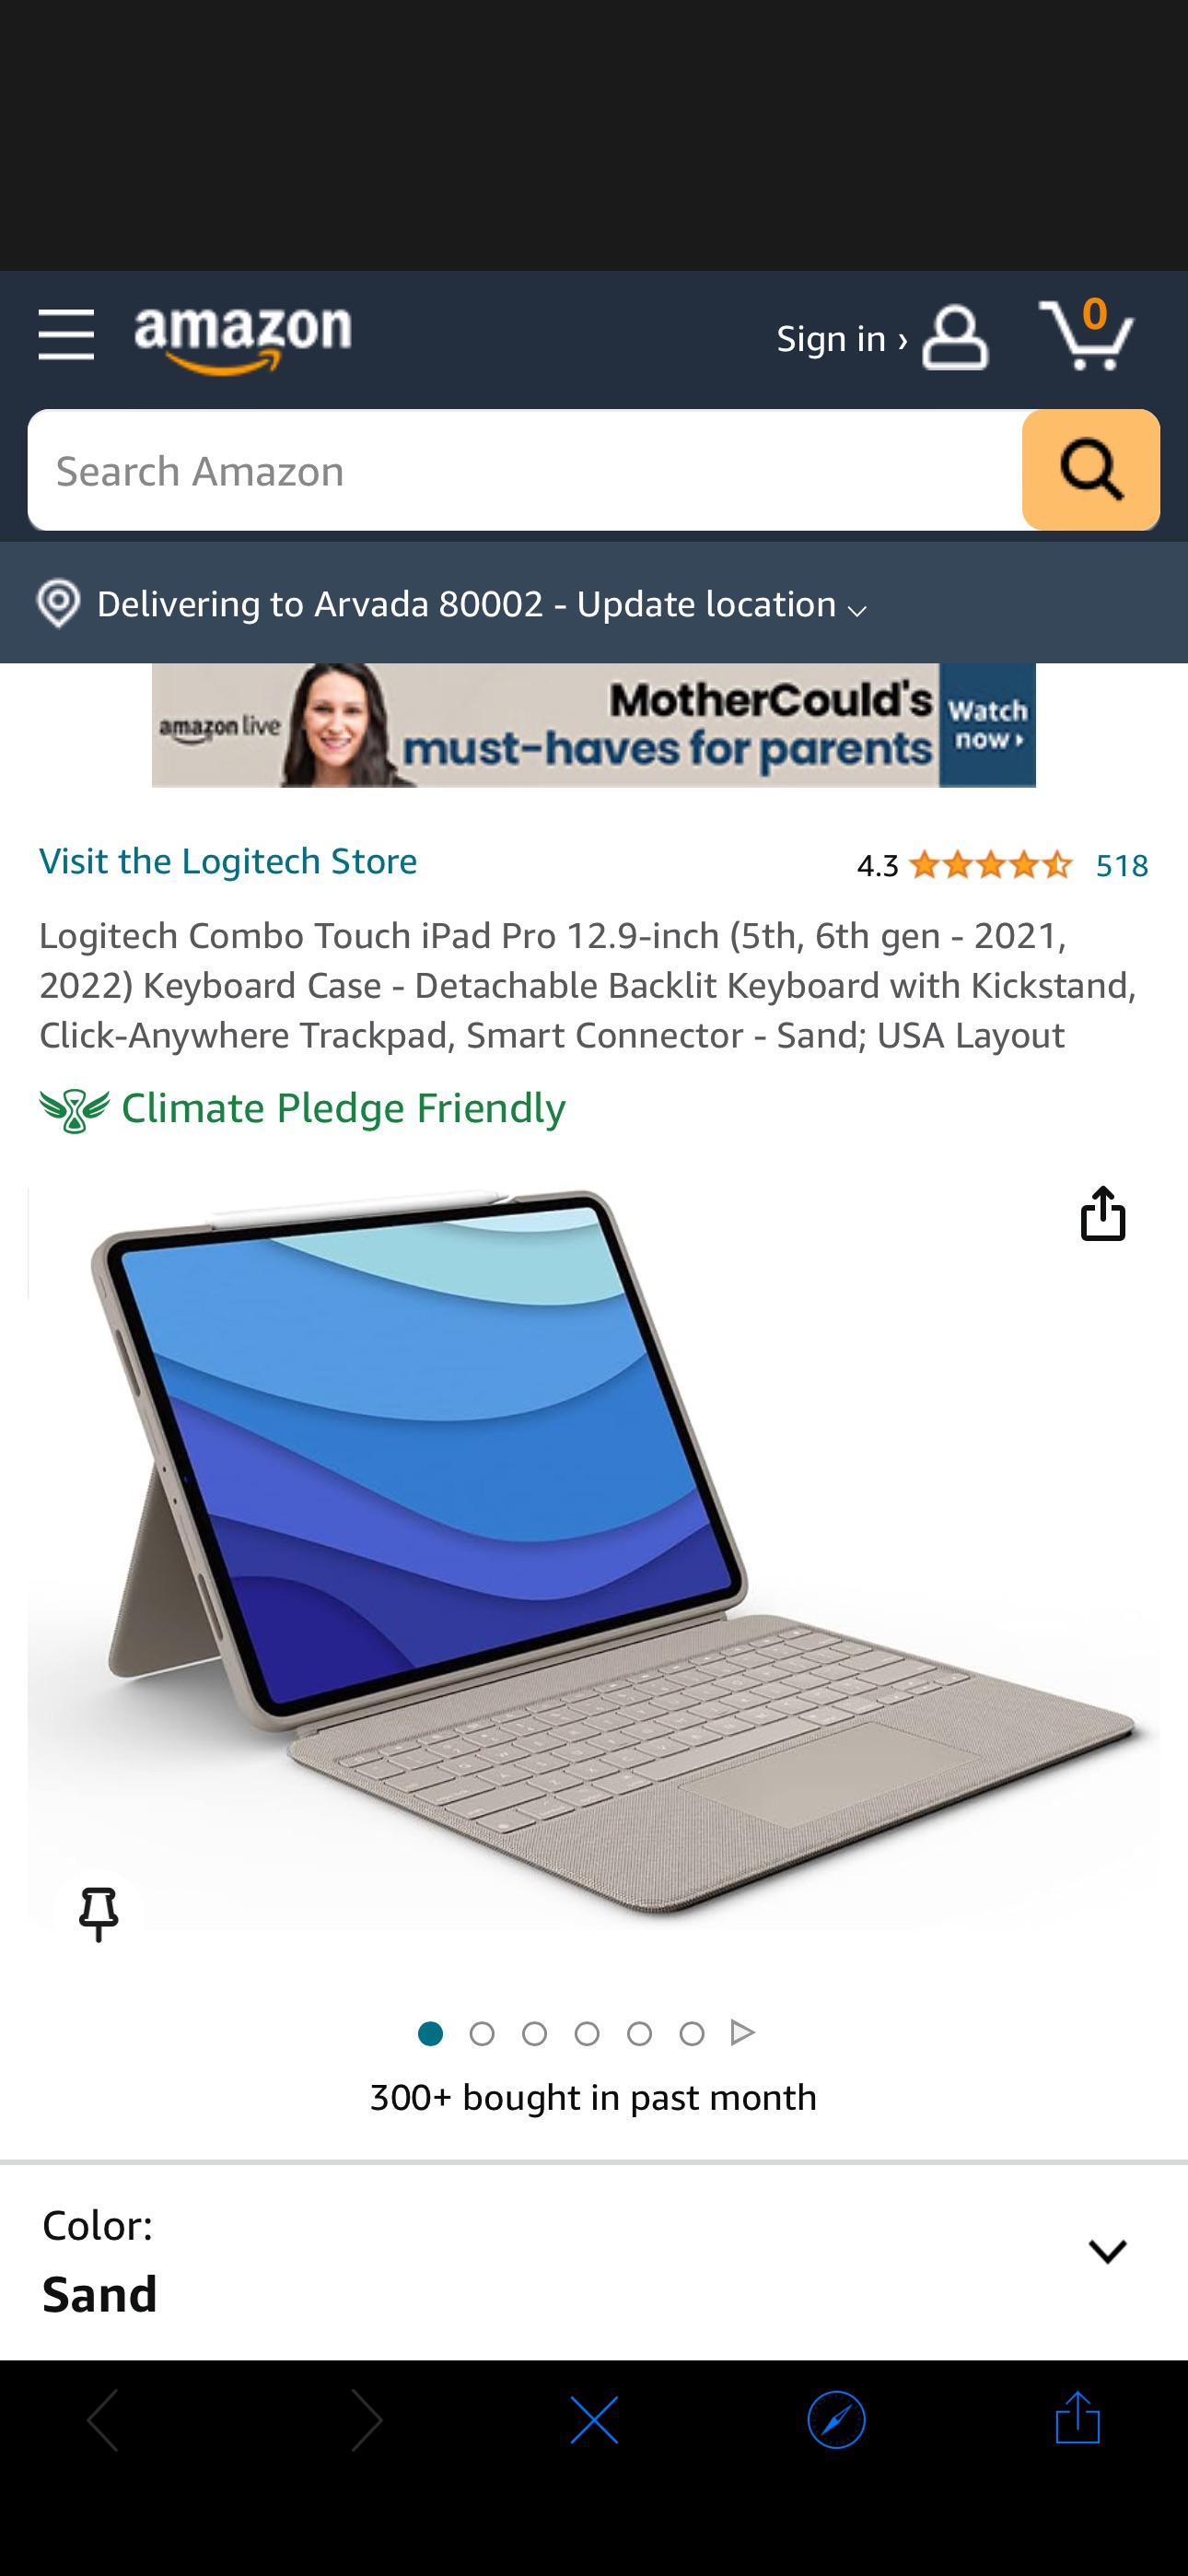 Amazon.com: Logitech Combo Touch iPad Pro 12.9-inch (5th, 6th gen - 2021, 2022) Keyboard Case - Detachable Backlit Keyboard with Kickstand, Click-Anywhere Trackpad, Smart Connector - Sand; USA Layout 